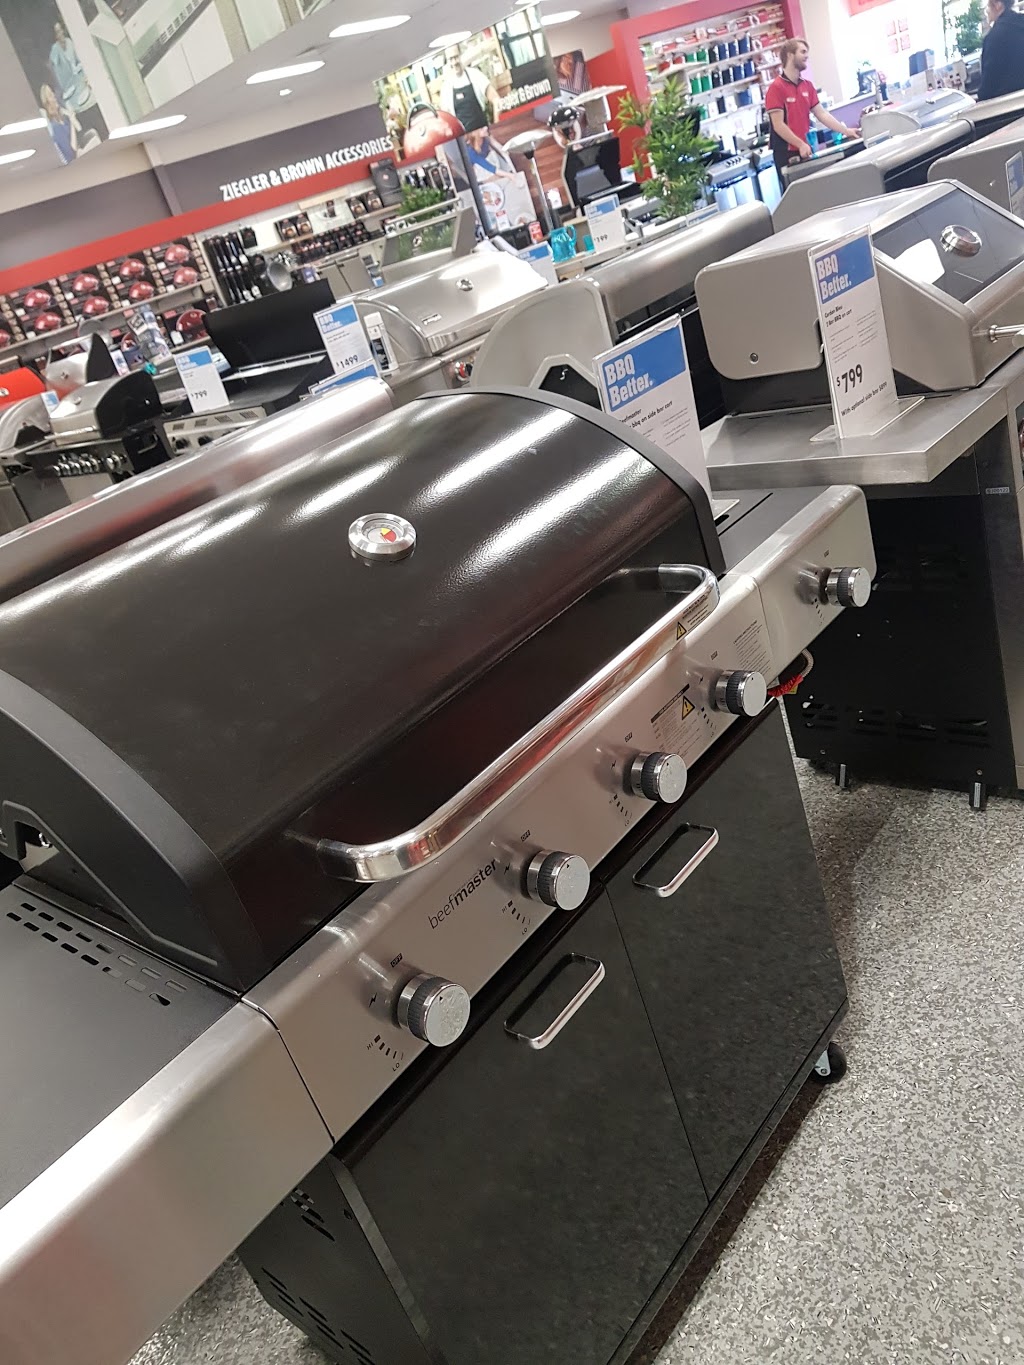 Barbeques Galore Warrawong | store | 131 King St, Warrawong NSW 2502, Australia | 0242762211 OR +61 2 4276 2211